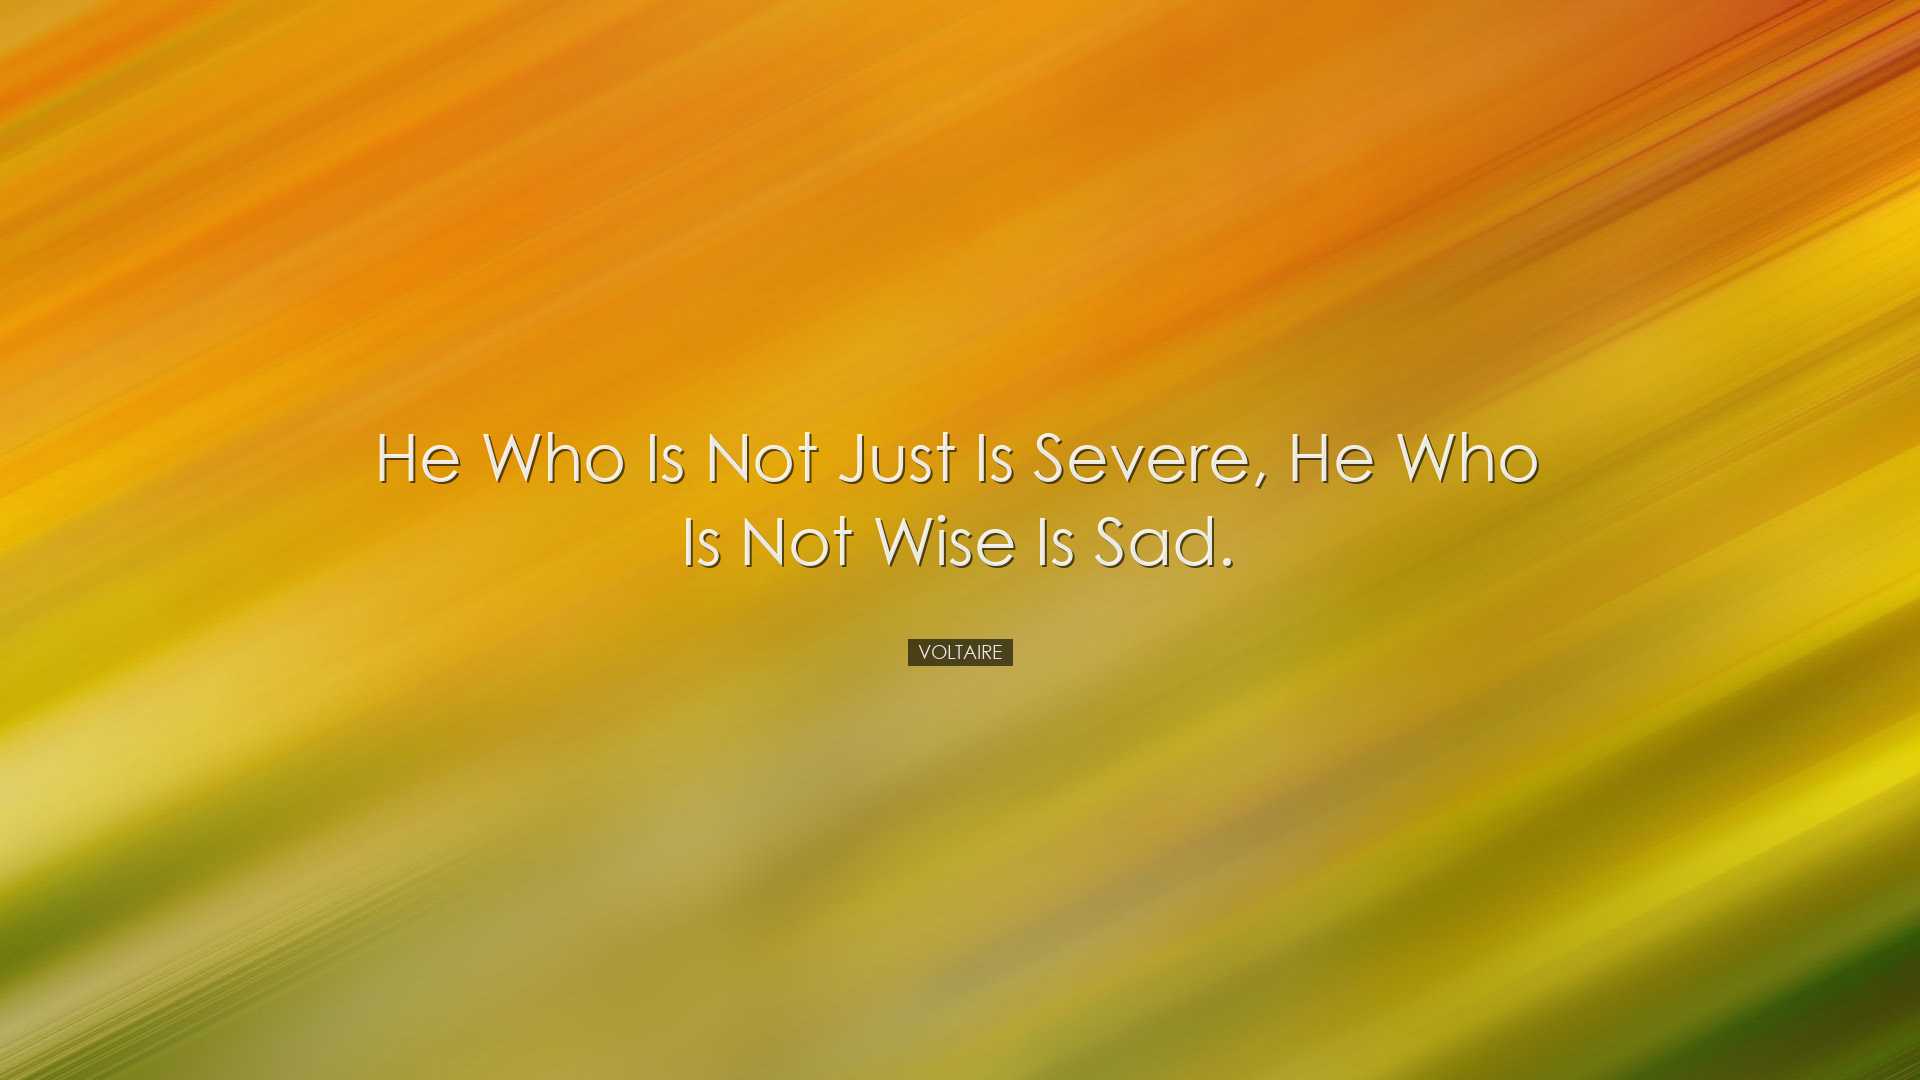 He who is not just is severe, he who is not wise is sad. - Voltair